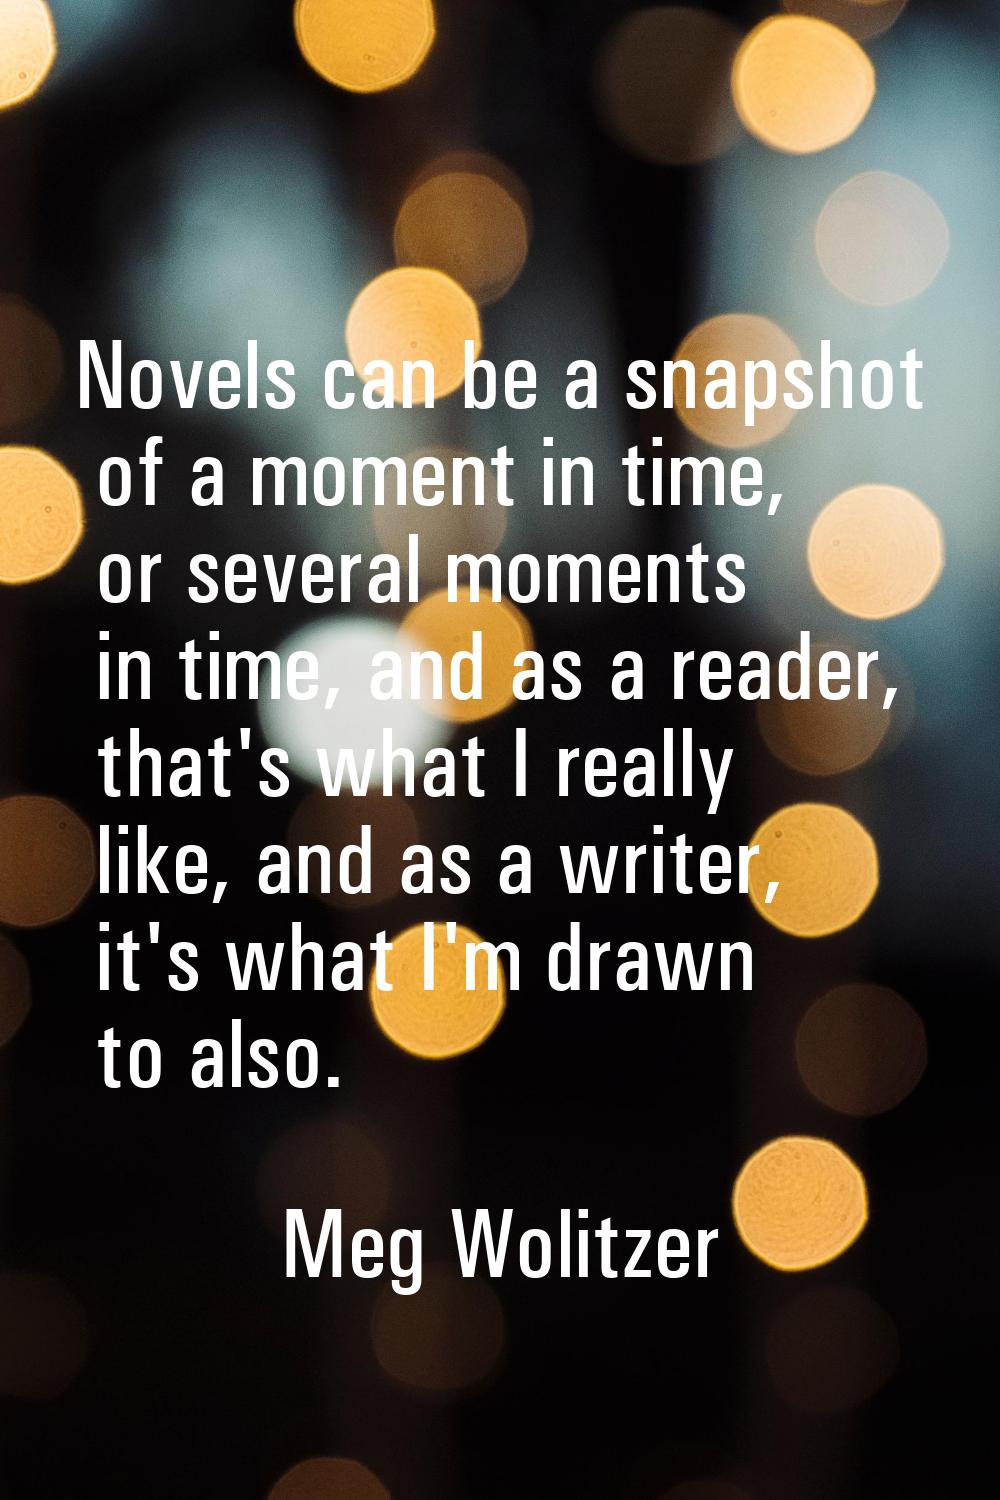 Novels can be a snapshot of a moment in time, or several moments in time, and as a reader, that's w